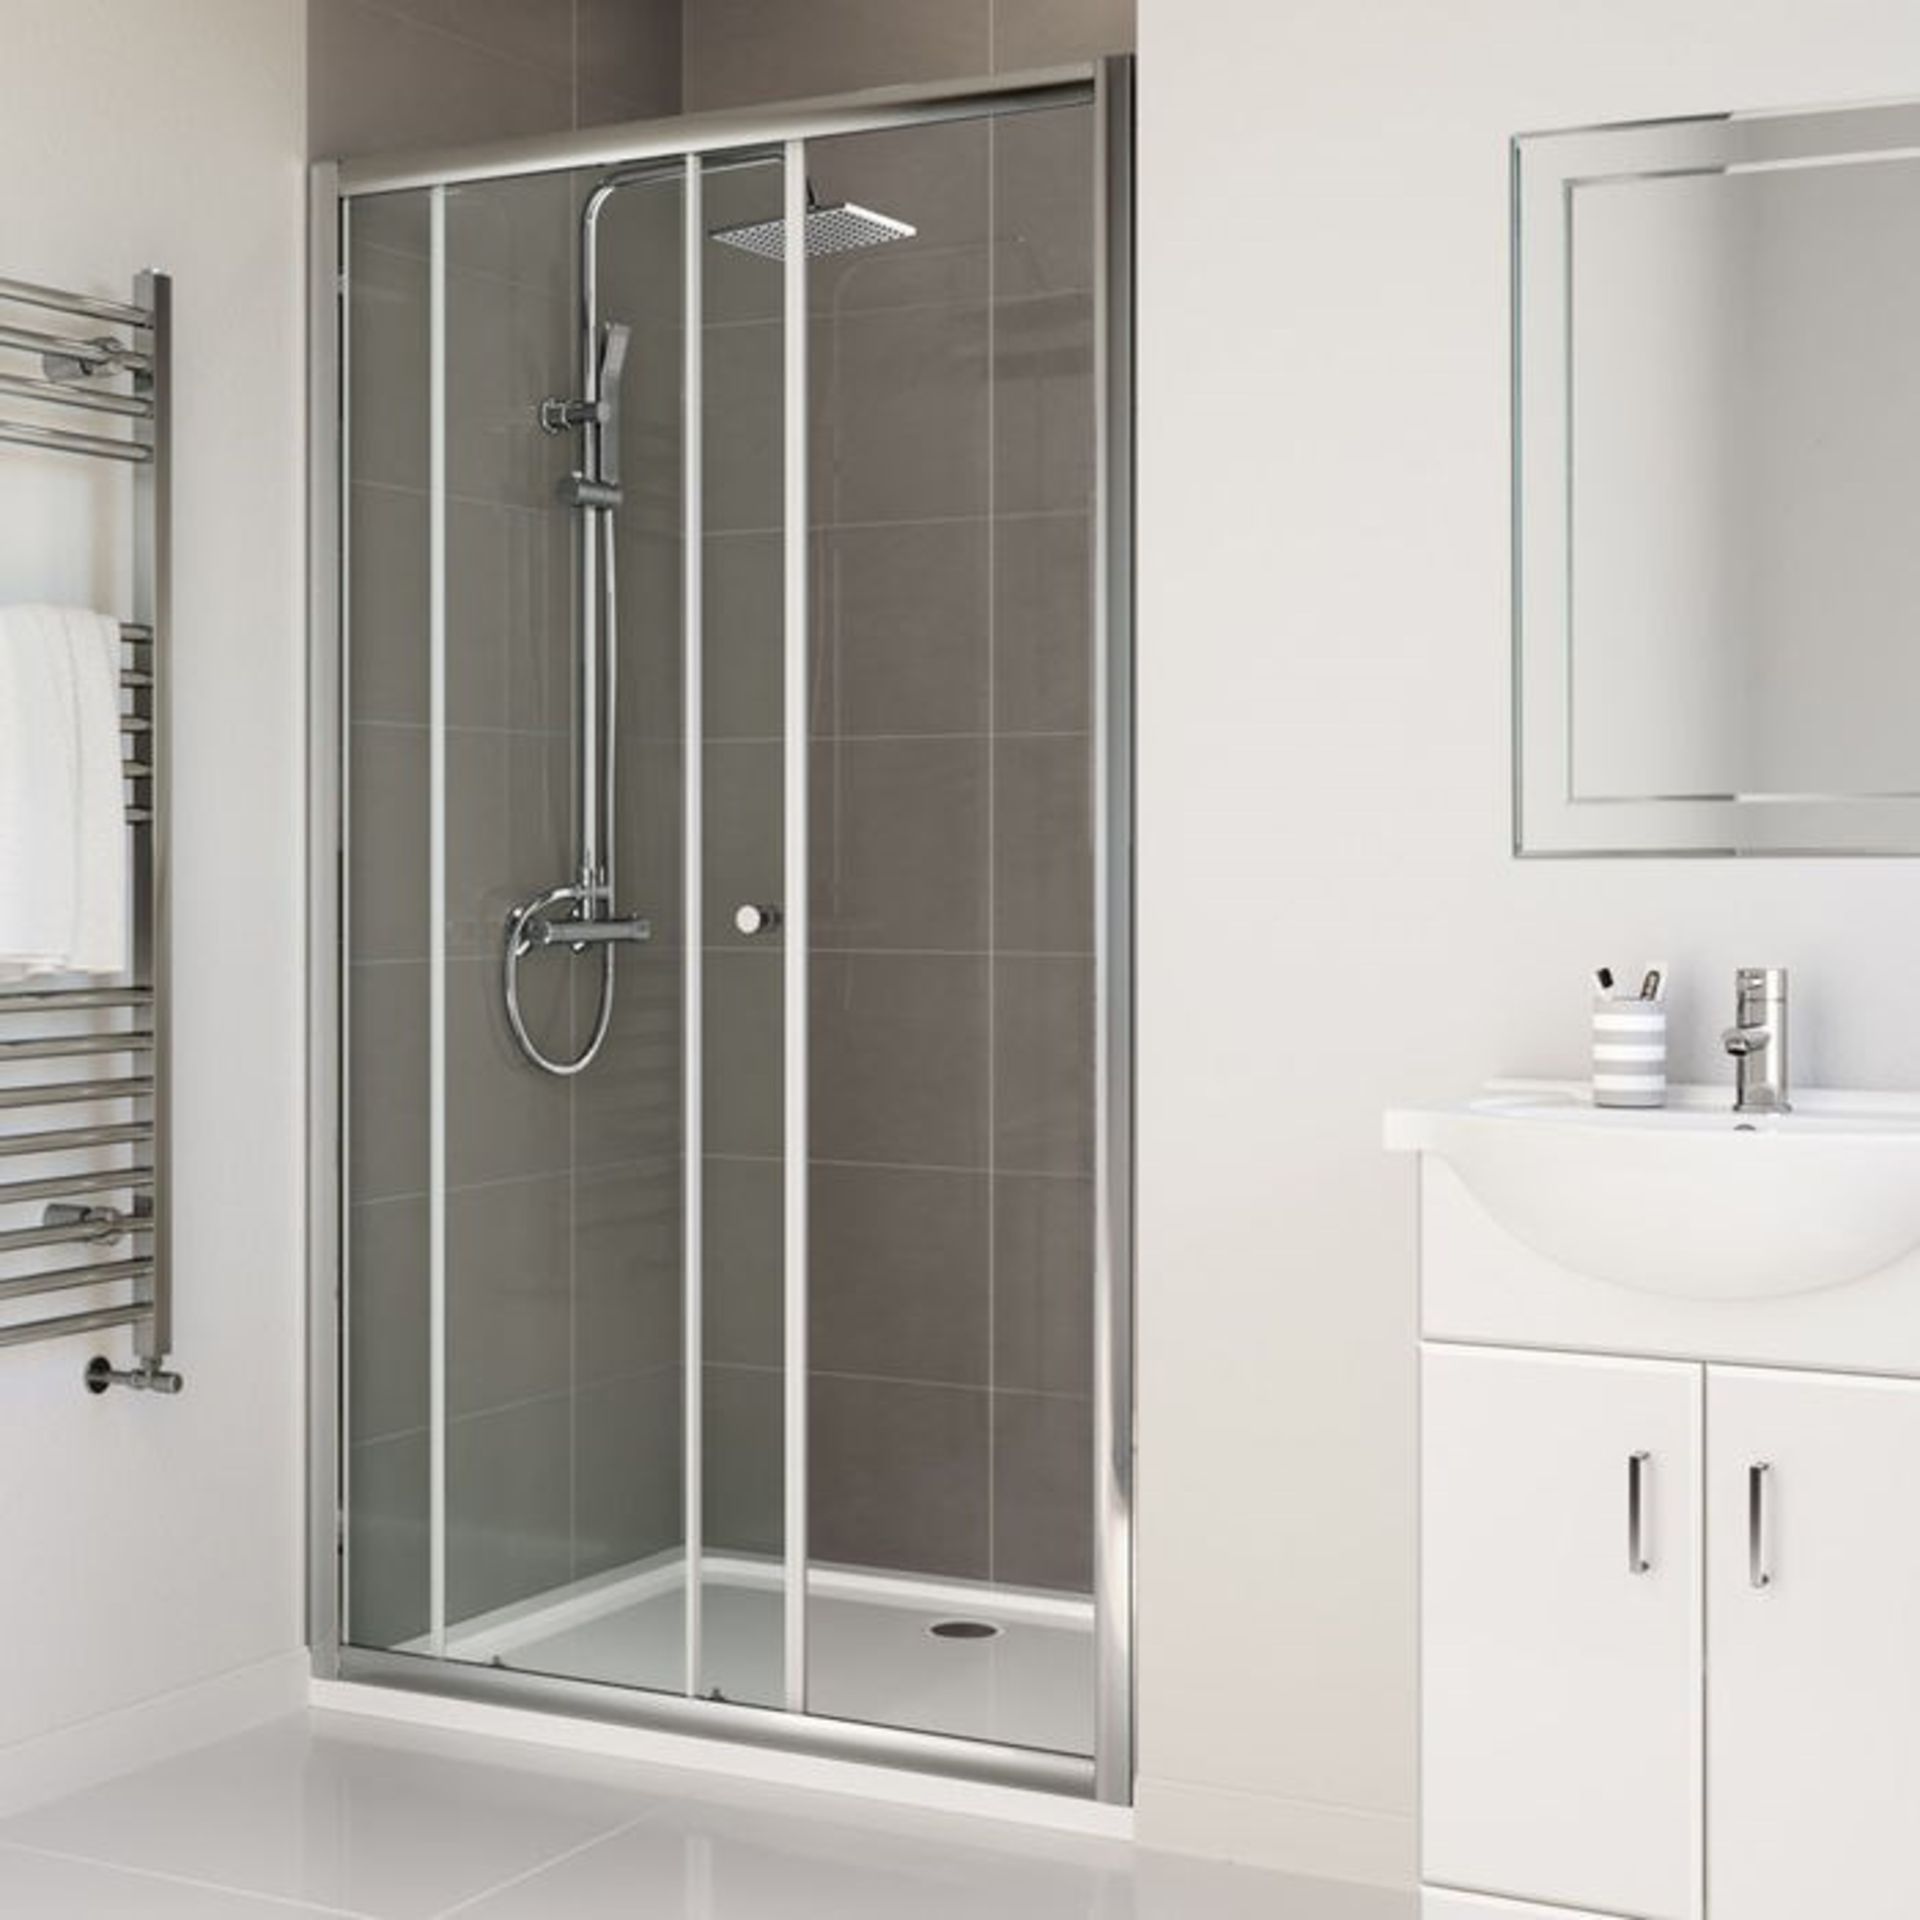 NEW (NS63) 1500mm - Elements Sliding Shower Door. RRP £399.99.8mm Safety Glass Fully waterproo... - Image 2 of 3